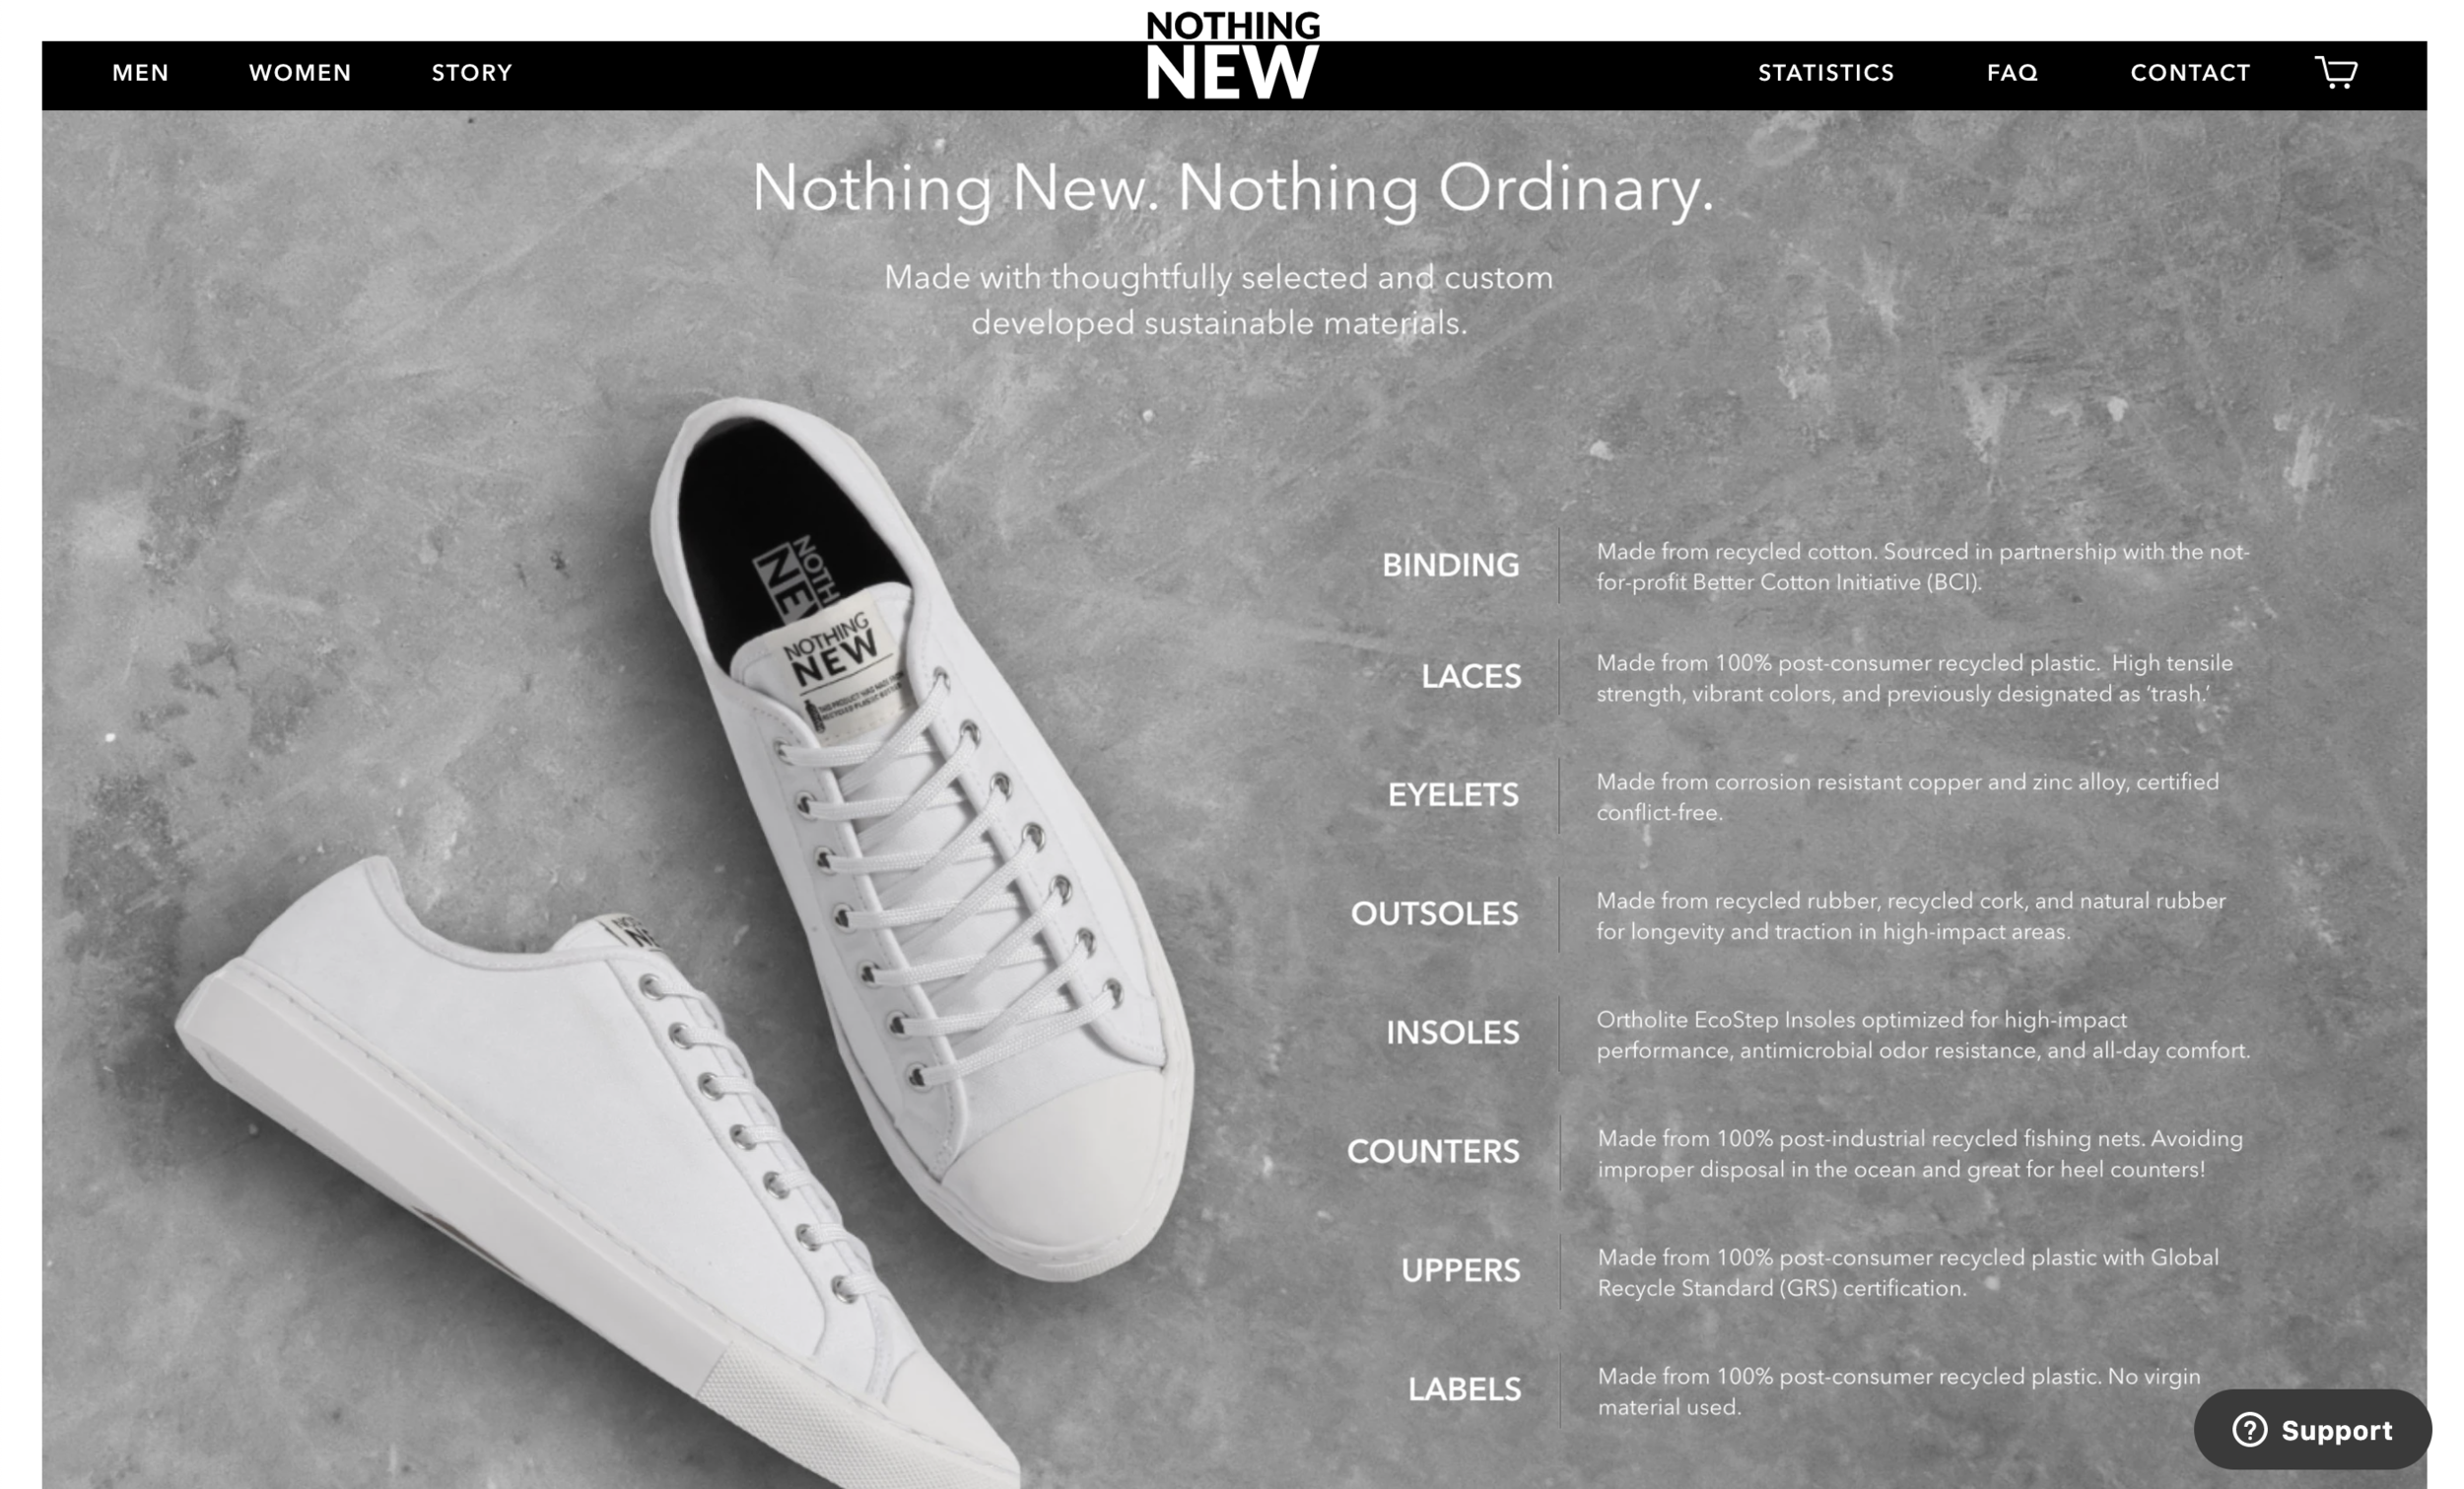 https://nothingnew.com/products/womens-low-top-white?collection=womens-sneakers  